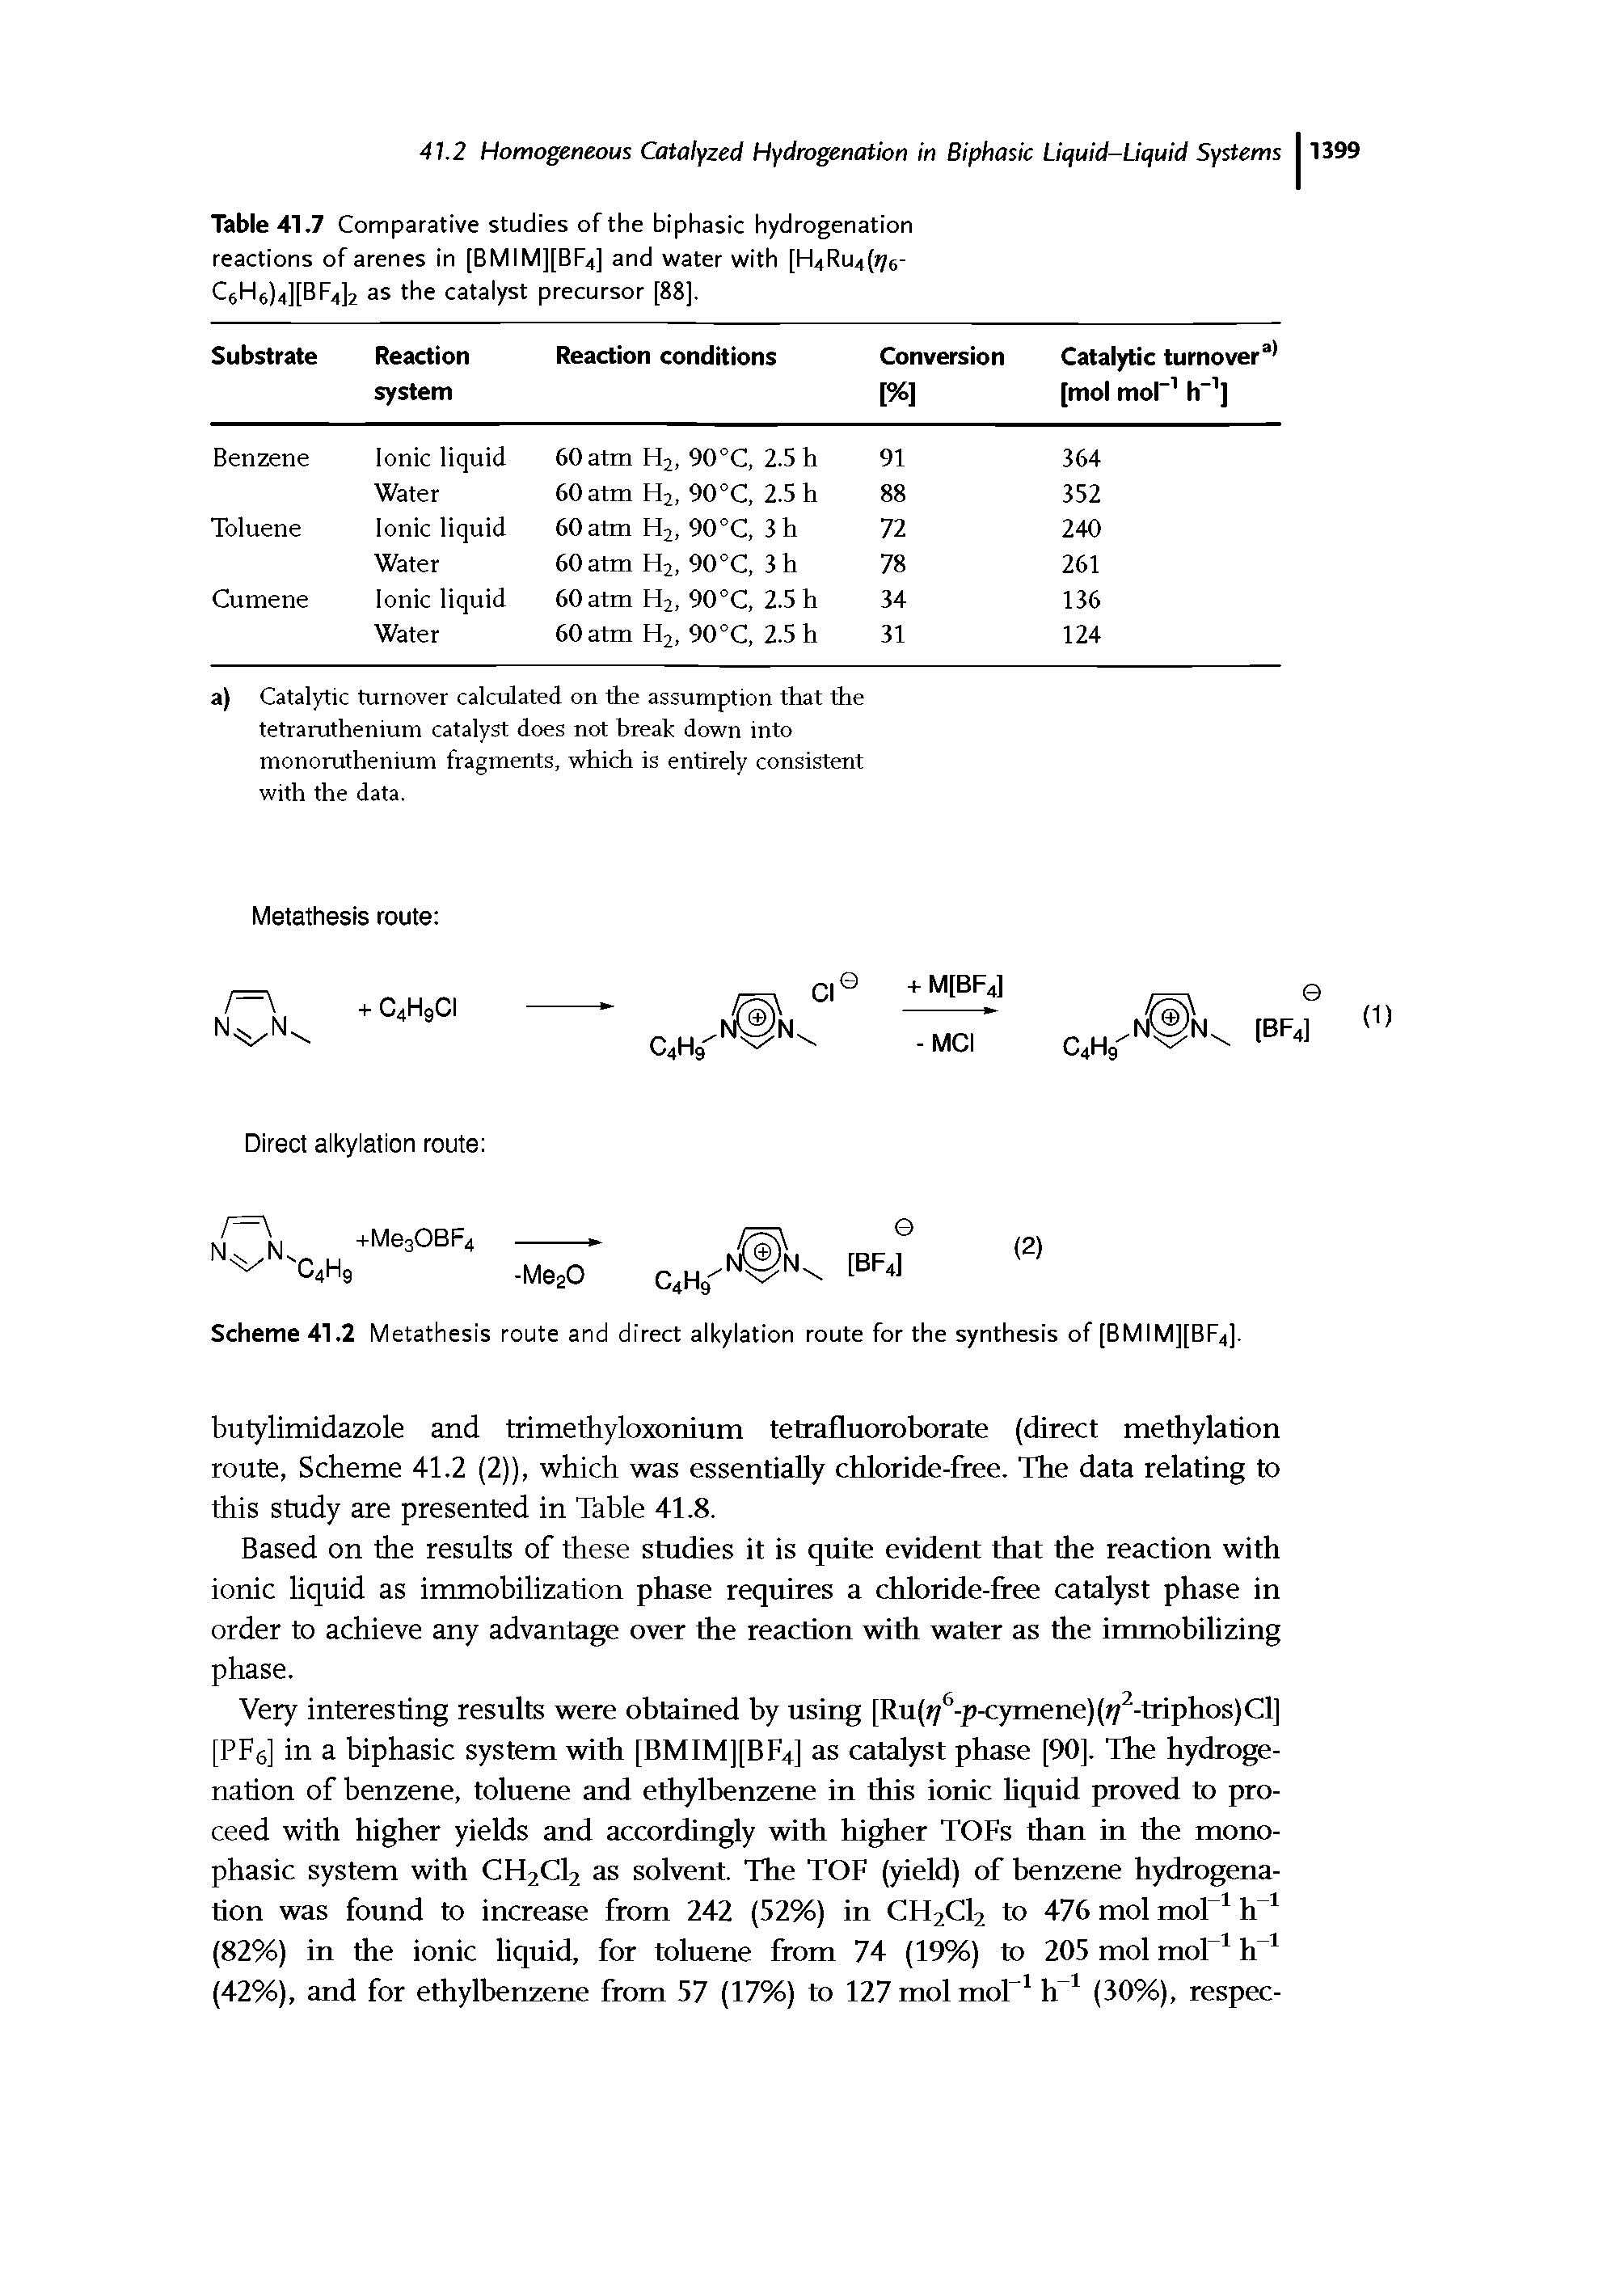 Table 41.7 Comparative studies of the biphasic hydrogenation reactions of arenes in [BMIM][BF4] and water with [H4Ru4( 76-C6H6)4][BF4]2 as the catalyst precursor [88].